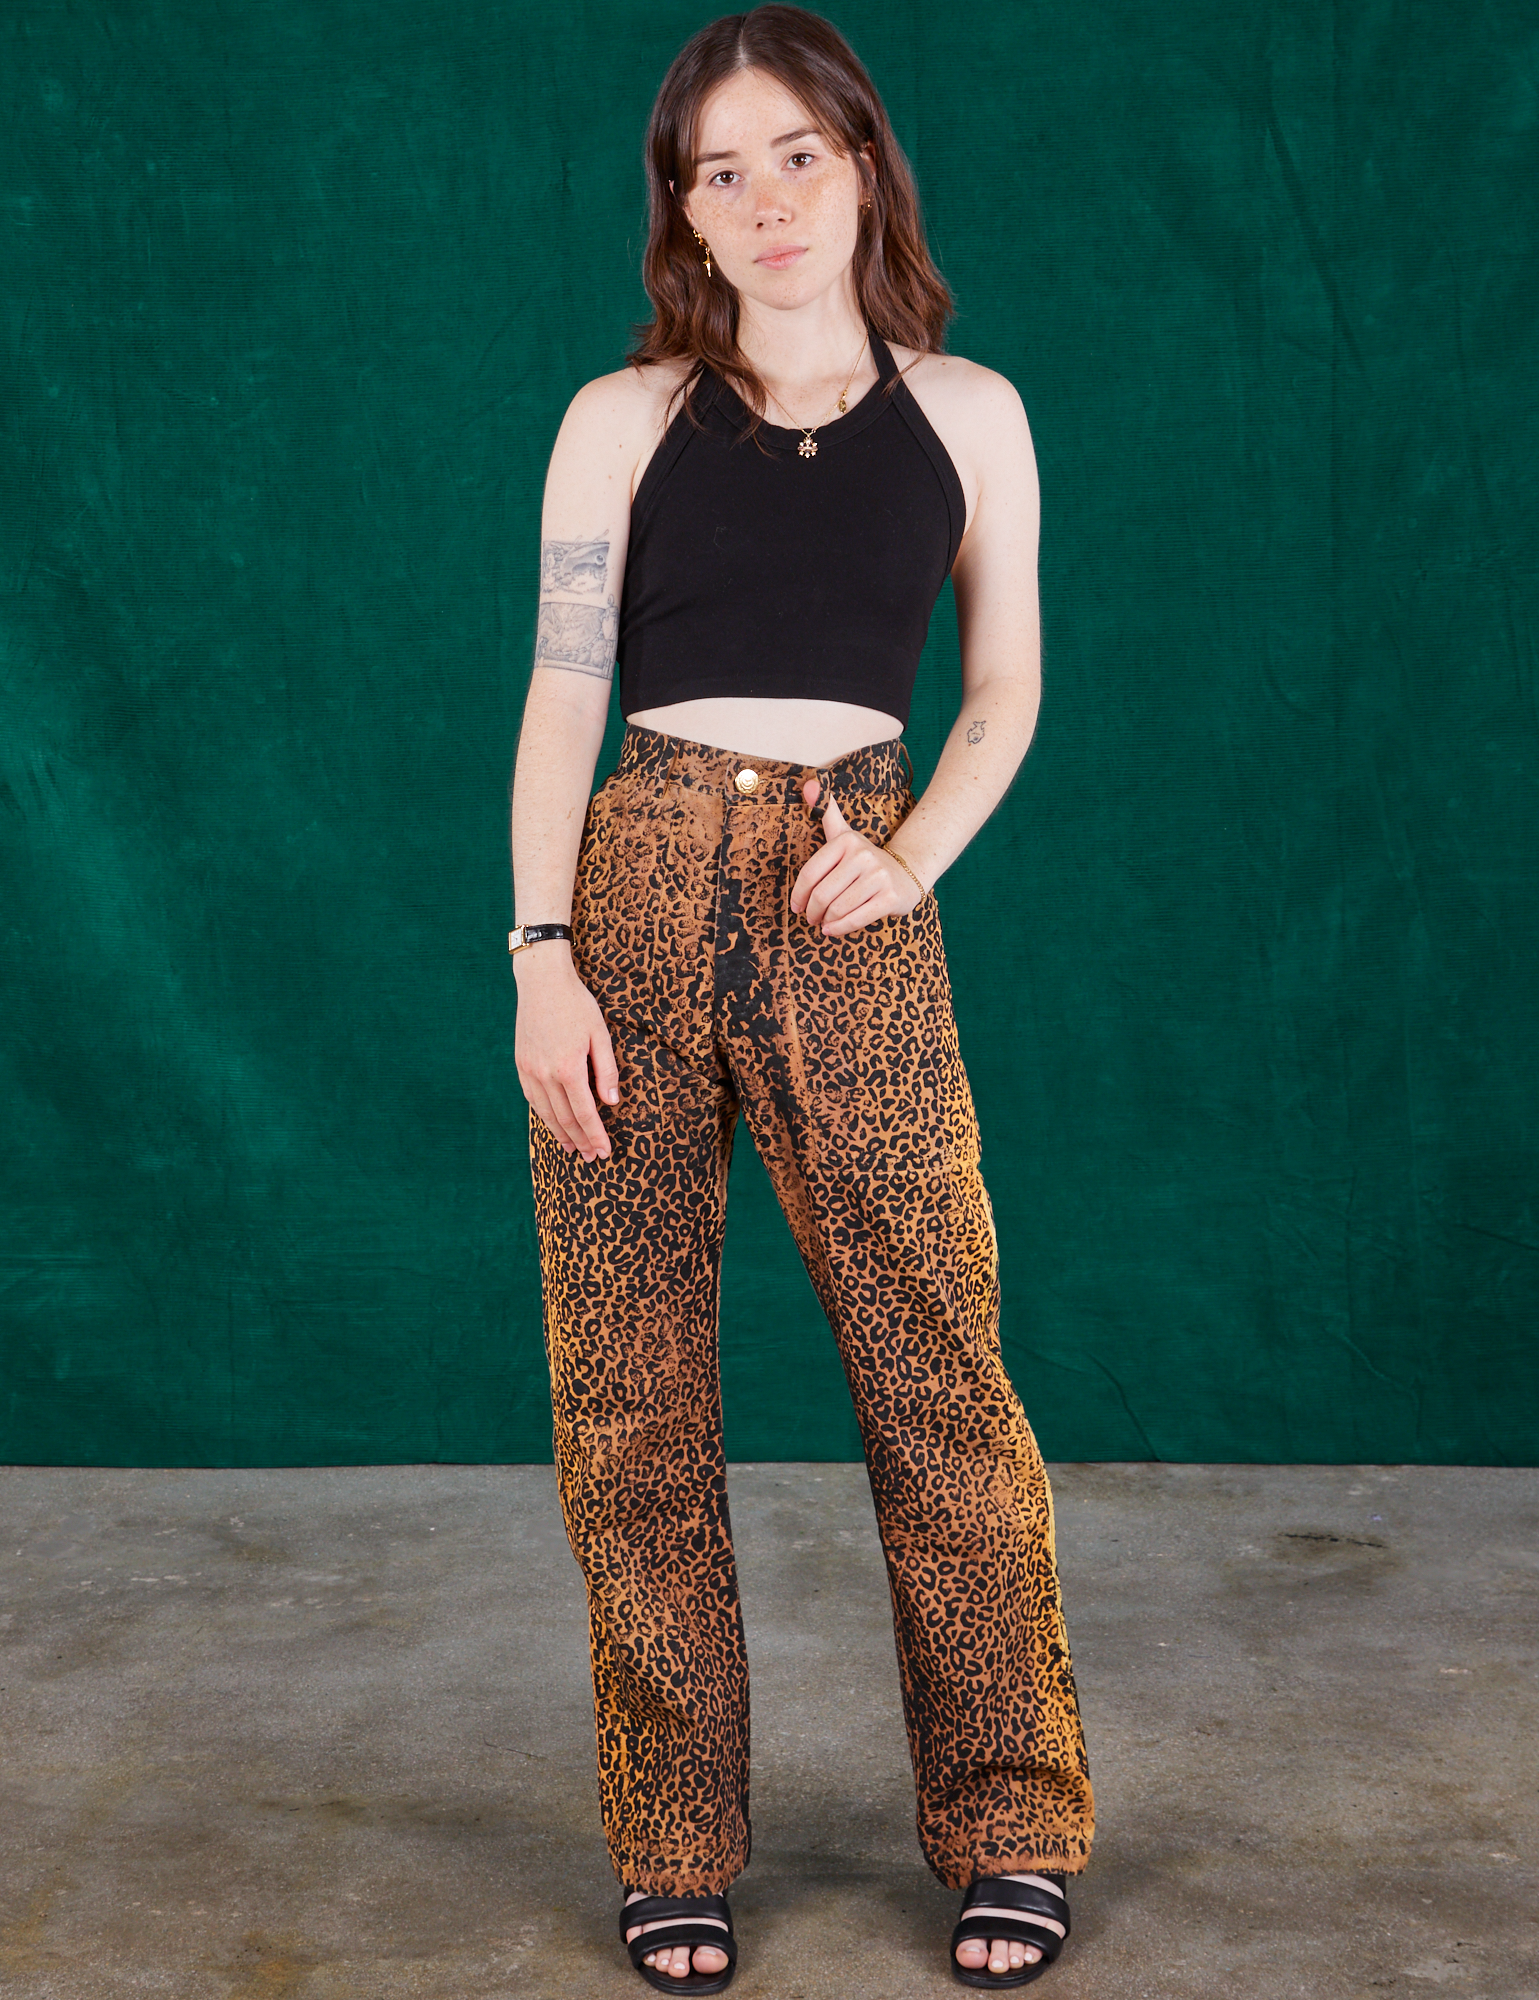 Hana is 5&#39;3&#39; and wearing XXS Leopard Work Pants and black Halter Top